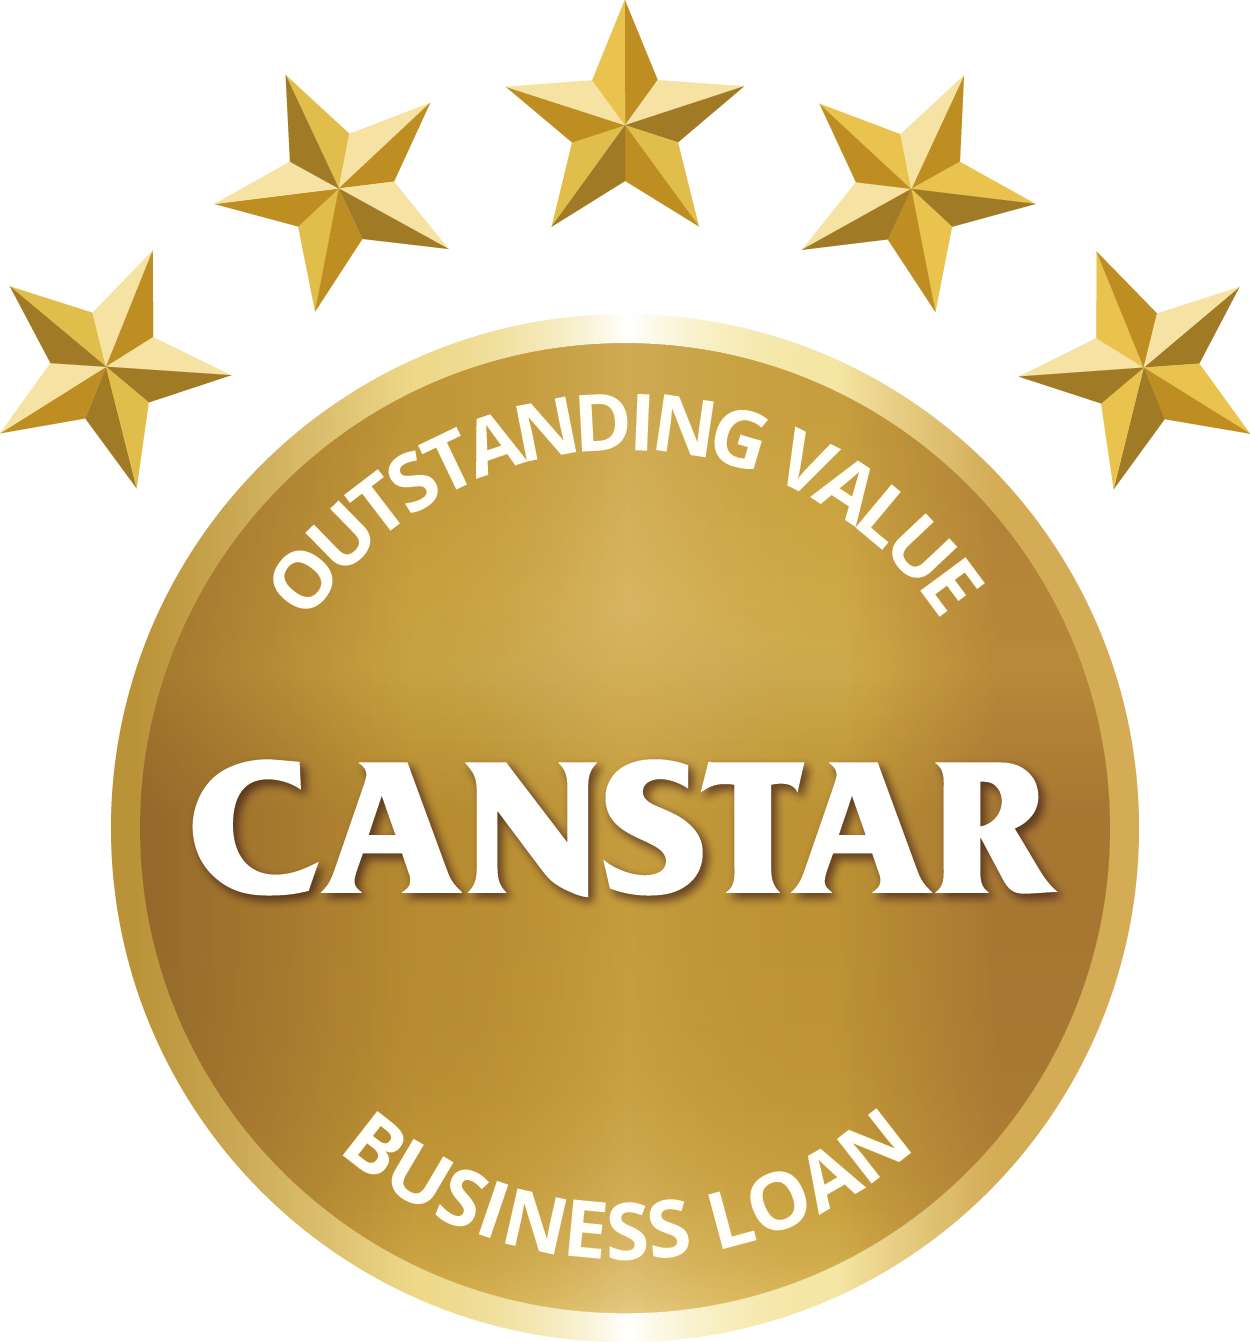 CANSTAR Outstanding Value Business Loan